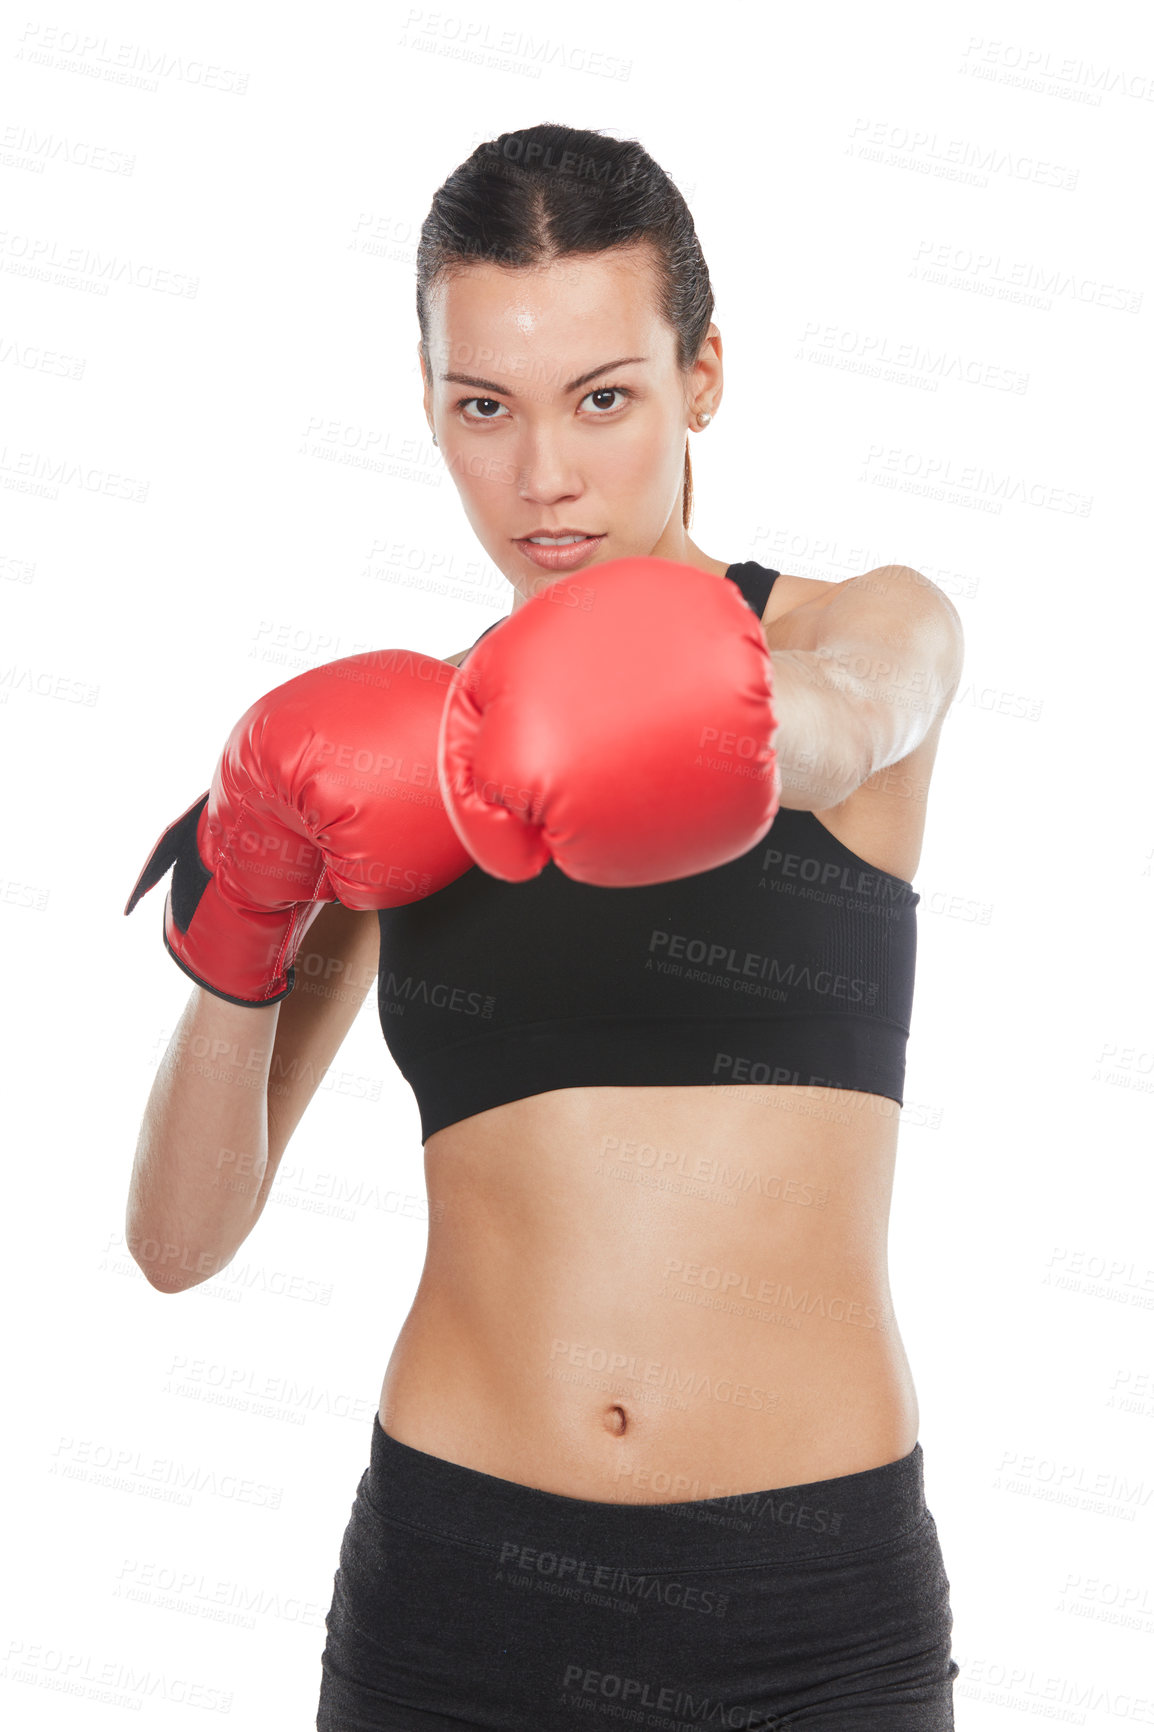 Buy stock photo Cropped portrait of a young female athlete boxing against a white background